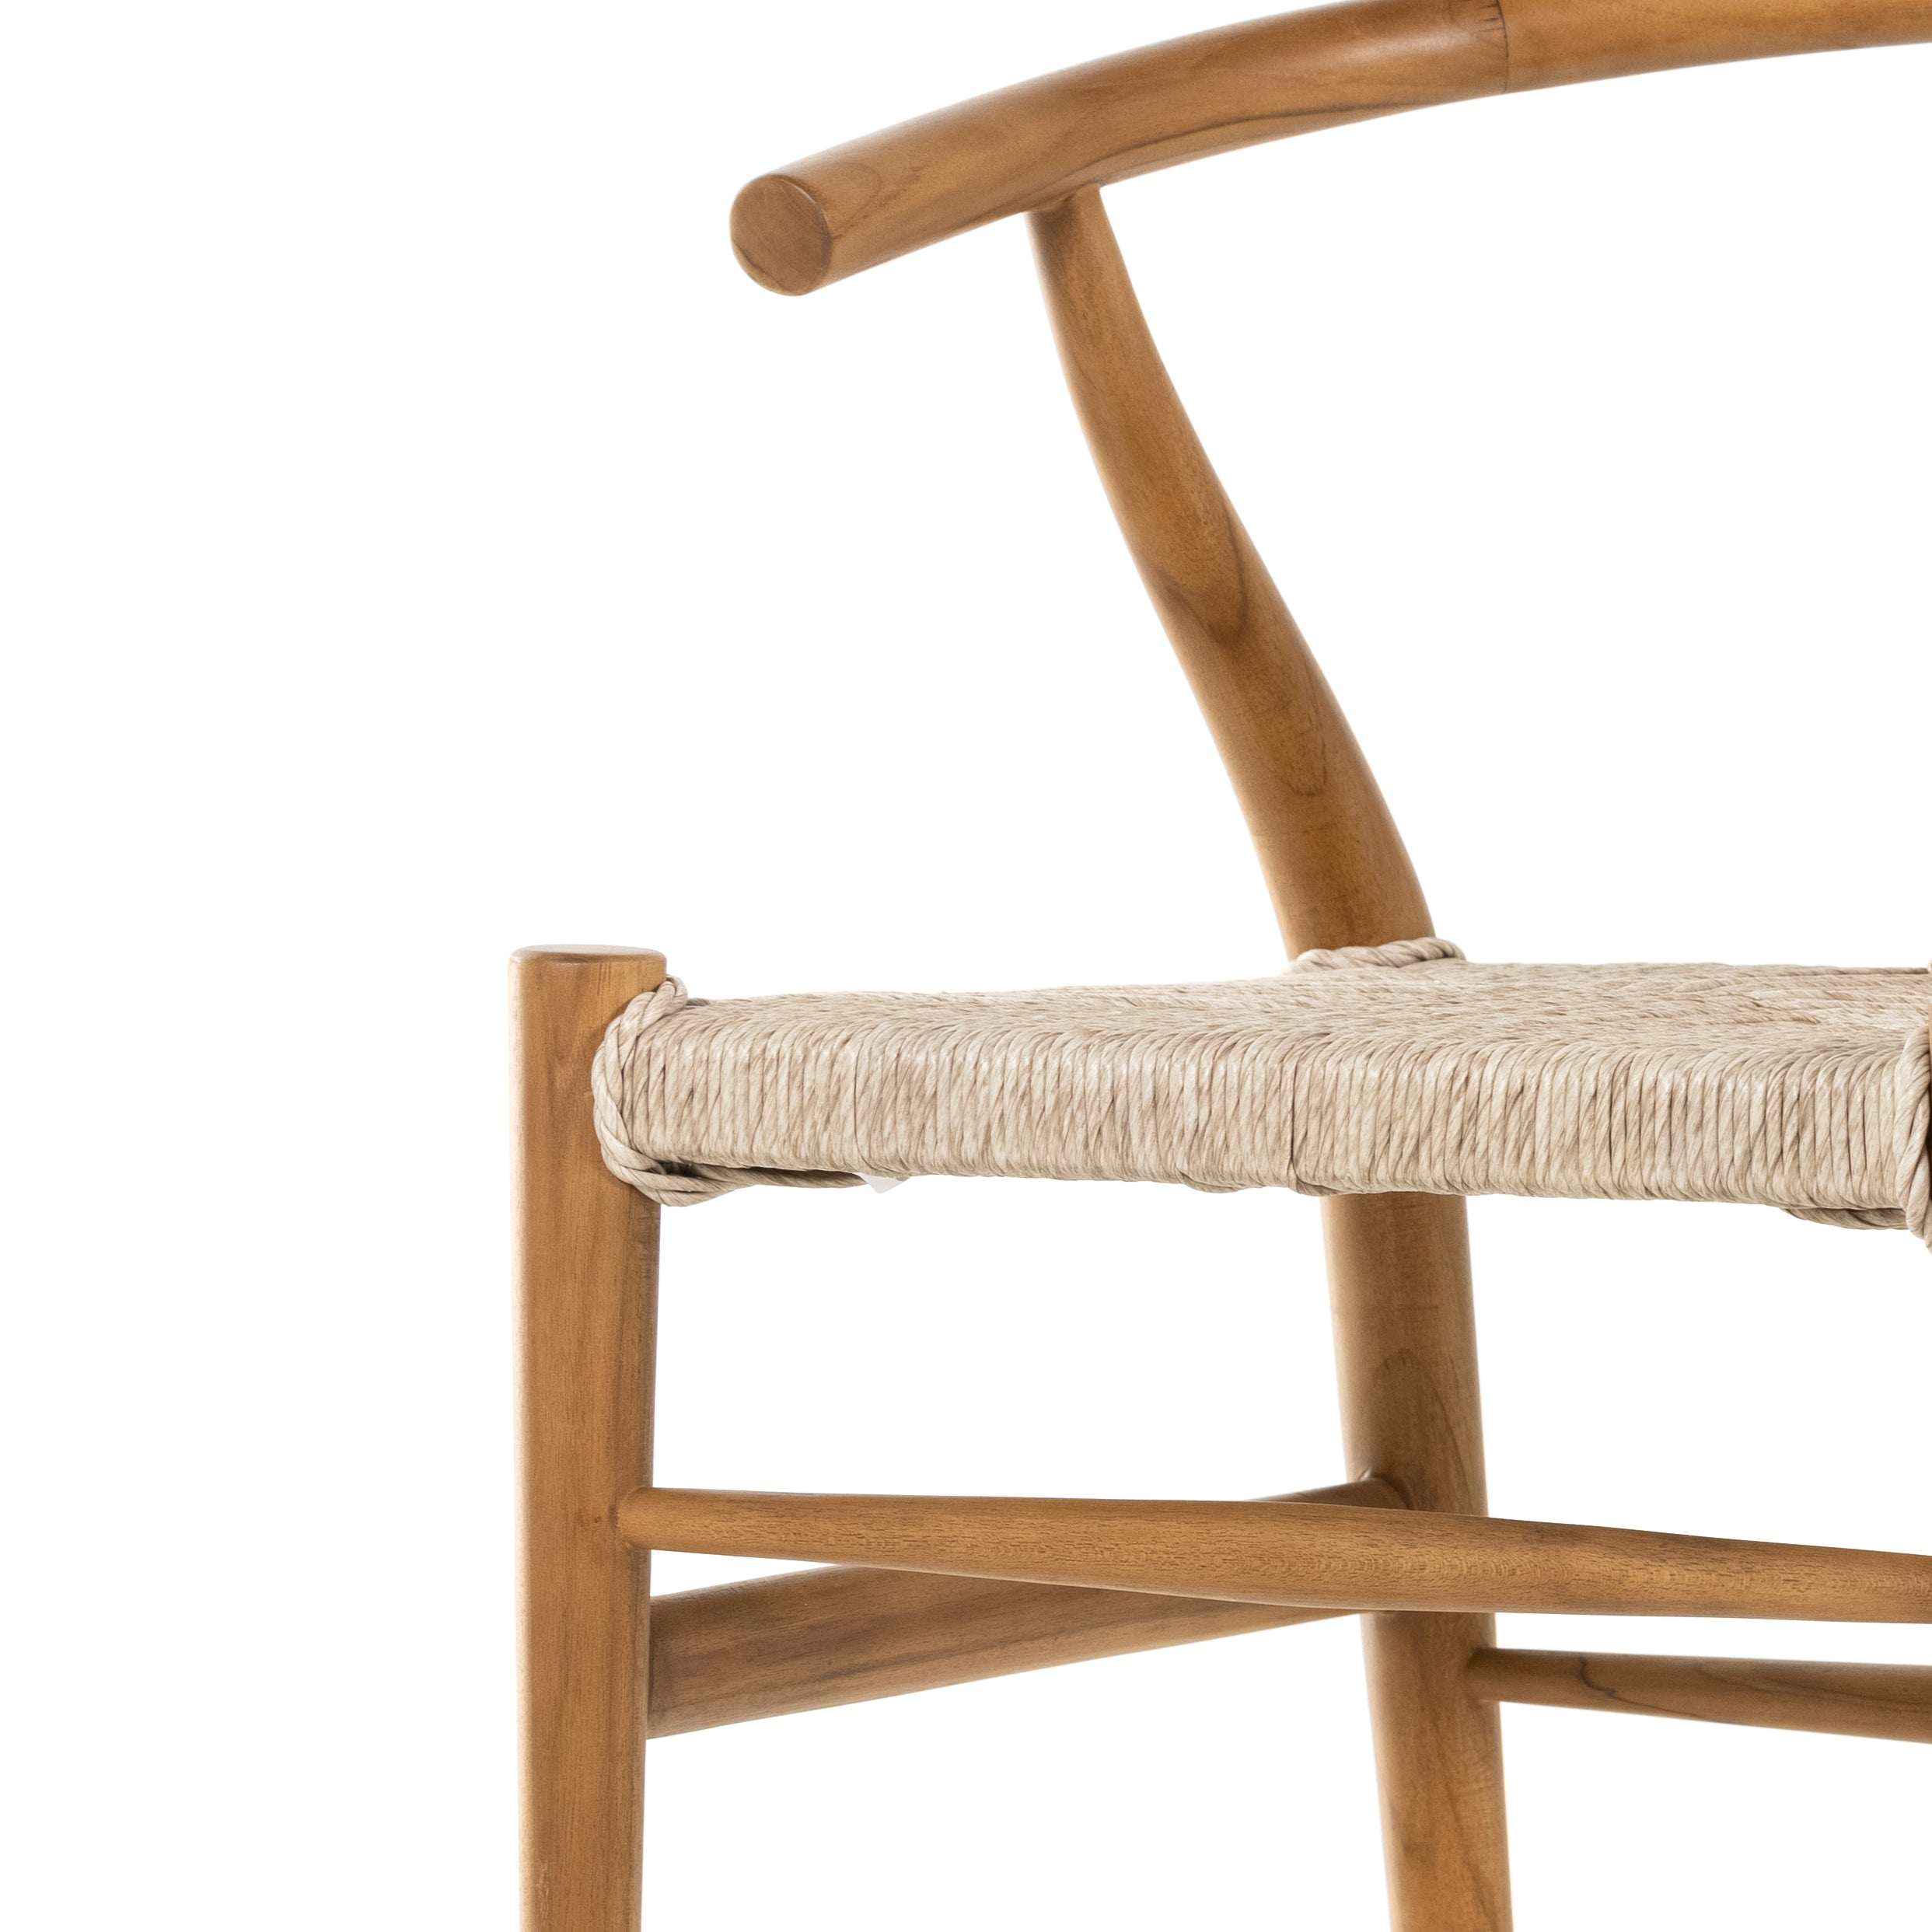 Modern curves redefine classic wishbone seating in this Muestra Dining Chair - Natural Teak. Vintage white all-weather wicker is woven for a dose of fresh texture against a neutral frame of natural teak. Cover or store indoors during inclement weather and when not in use.  Overall Dimensions: 21.50"w x 22.50"d x 31.50"h